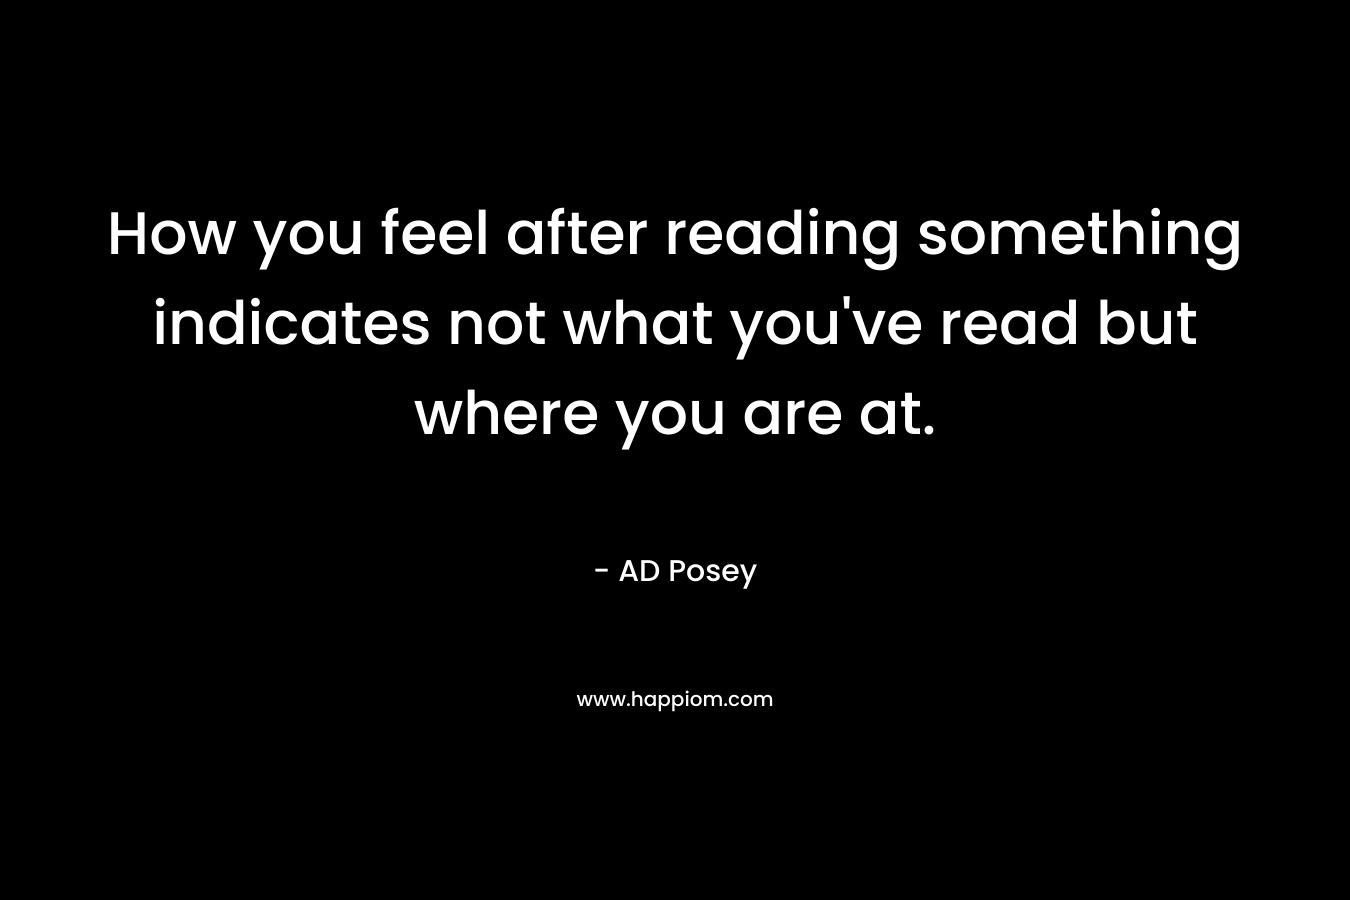 How you feel after reading something indicates not what you've read but where you are at.